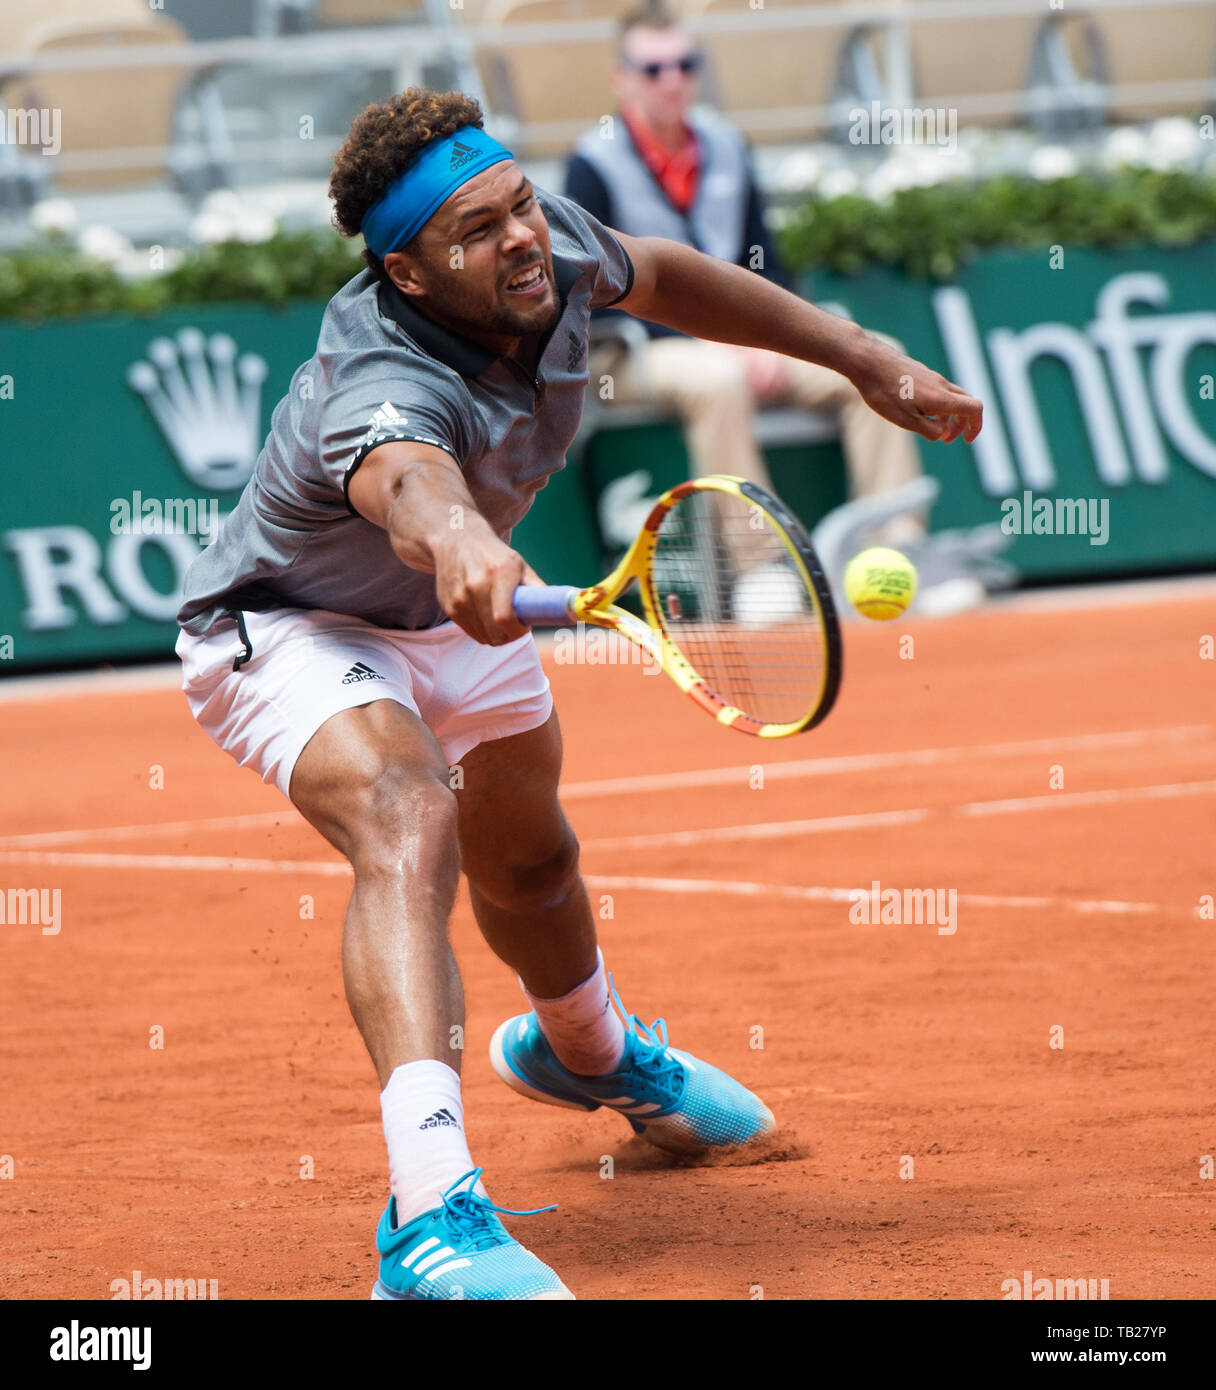 Paris, France. 29th May, 2019. Jo-Wilfried Tsonga (FRA) is defeated by Kei  Nishikori (JPN) 6-4, 4-6, 4-6, 4-6, at the French Open being played at  Stade Roland-Garros in Paris, France. © Karla